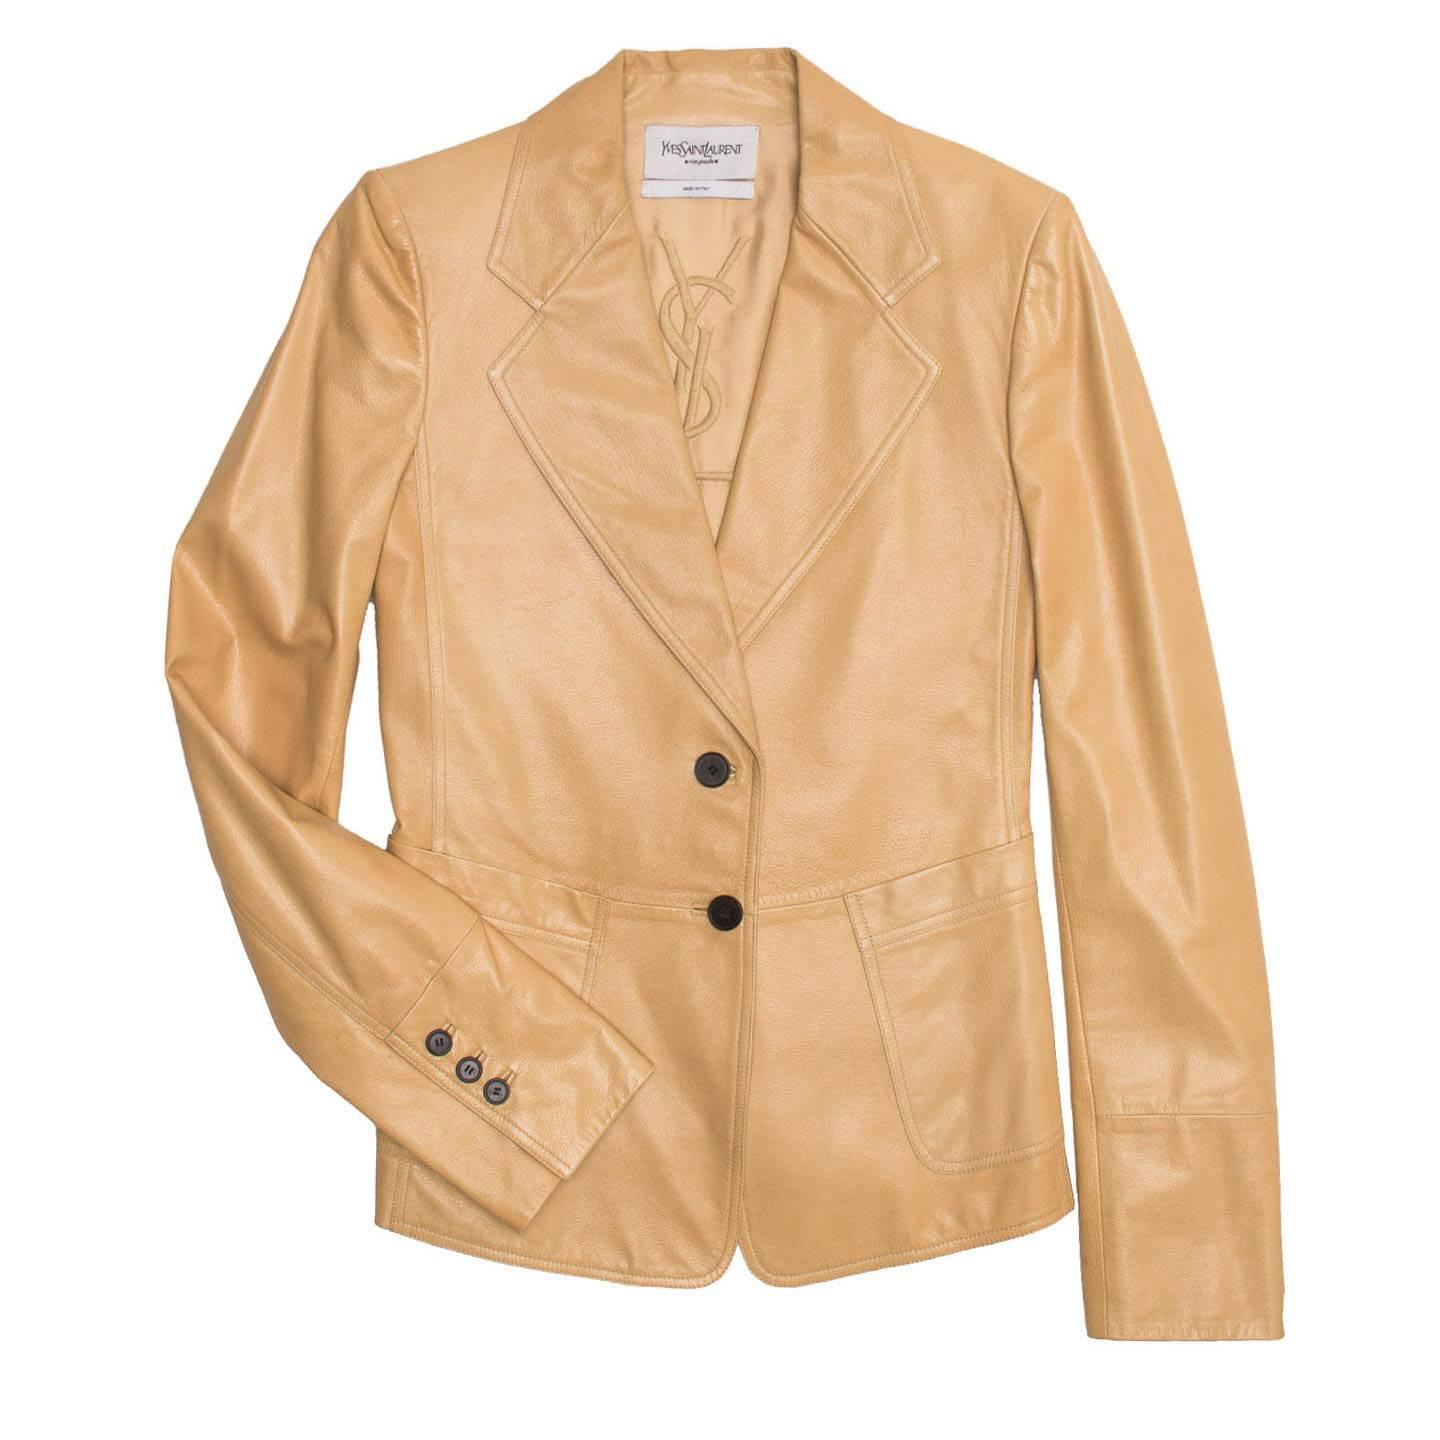 Camel colored fitted two button kangaroo leather blazer.

Size  40 French sizing

Condition  Excellent: worn once